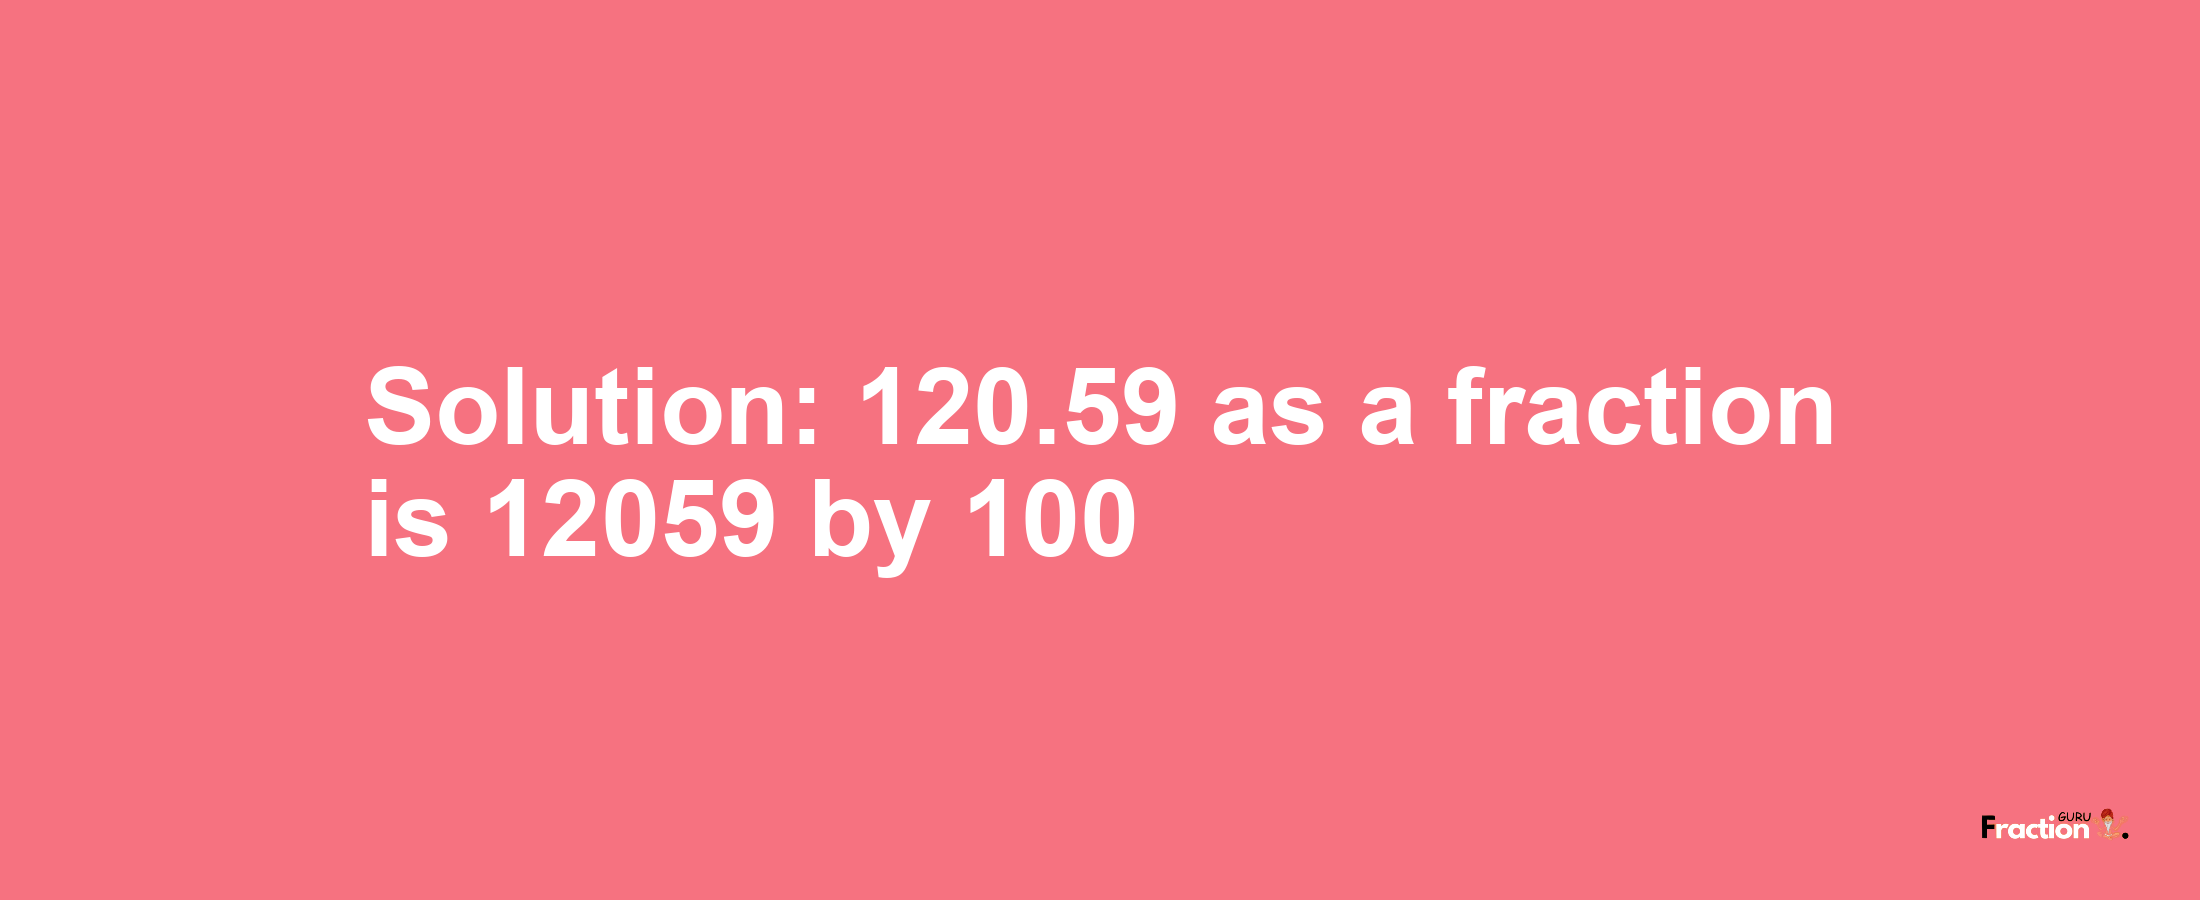 Solution:120.59 as a fraction is 12059/100